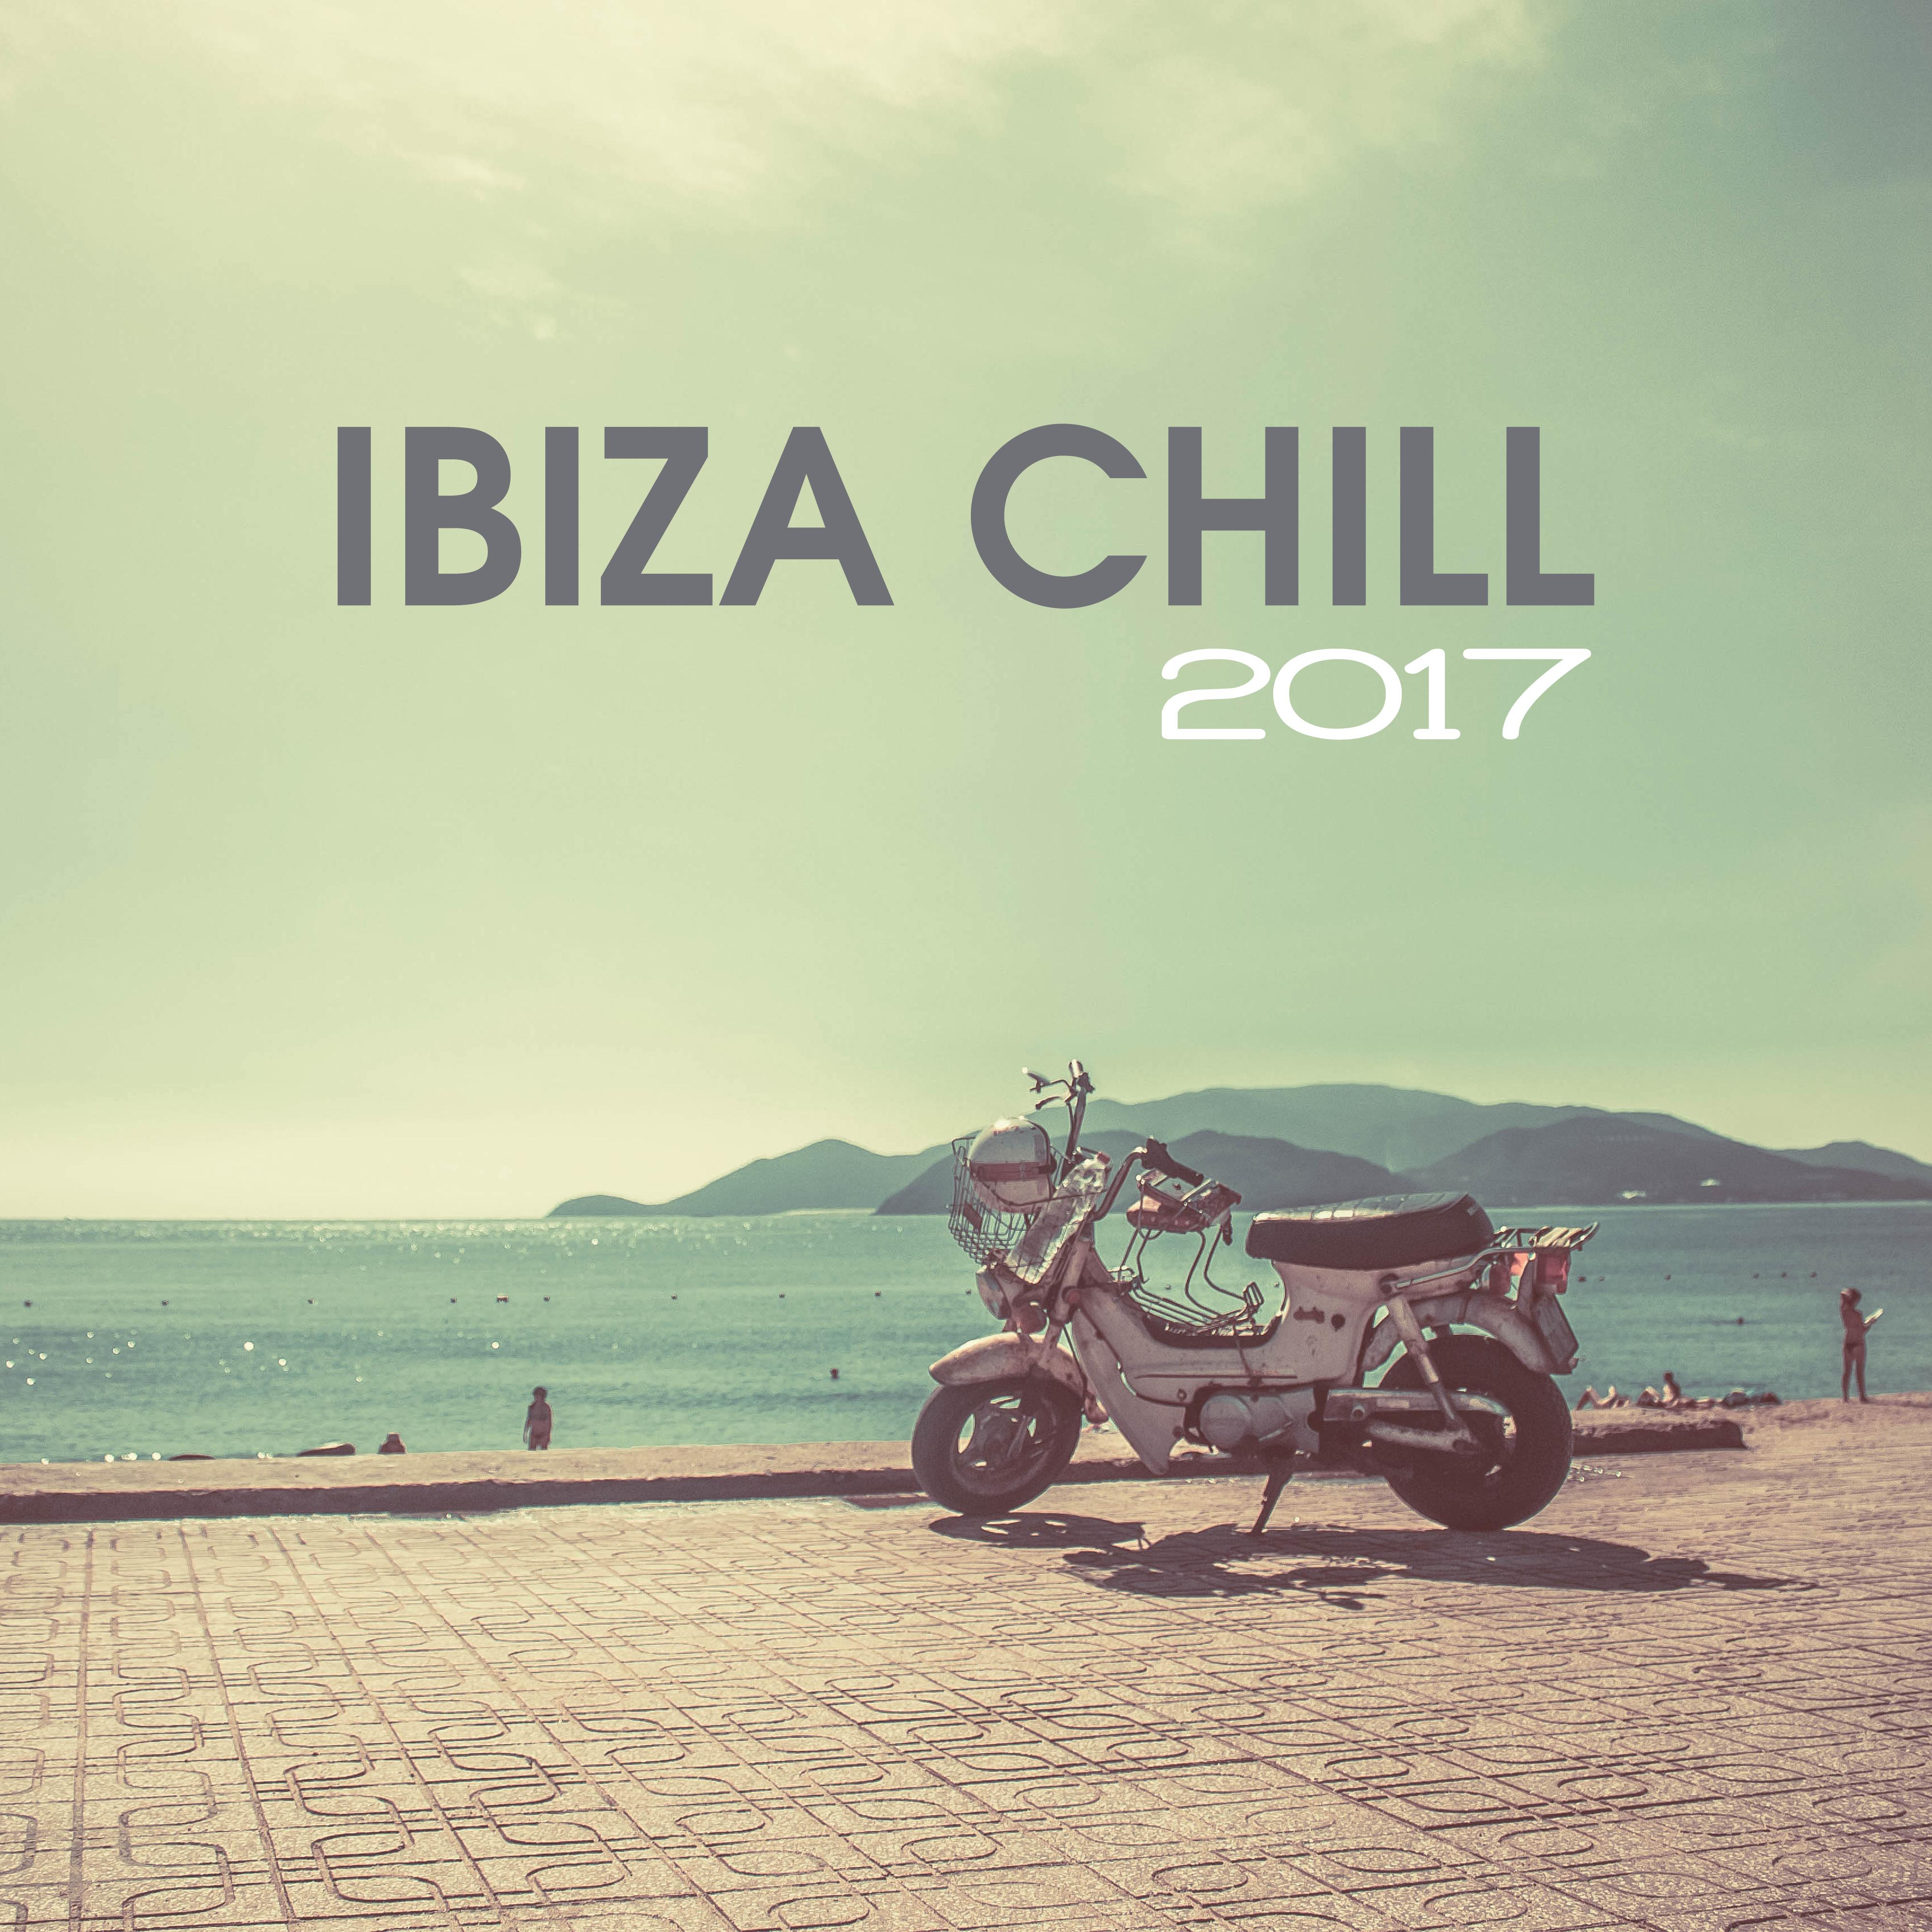 Ibiza Chill 2017  Best Holiday Music, Lounge Tunes, Summer Dreams, Relax